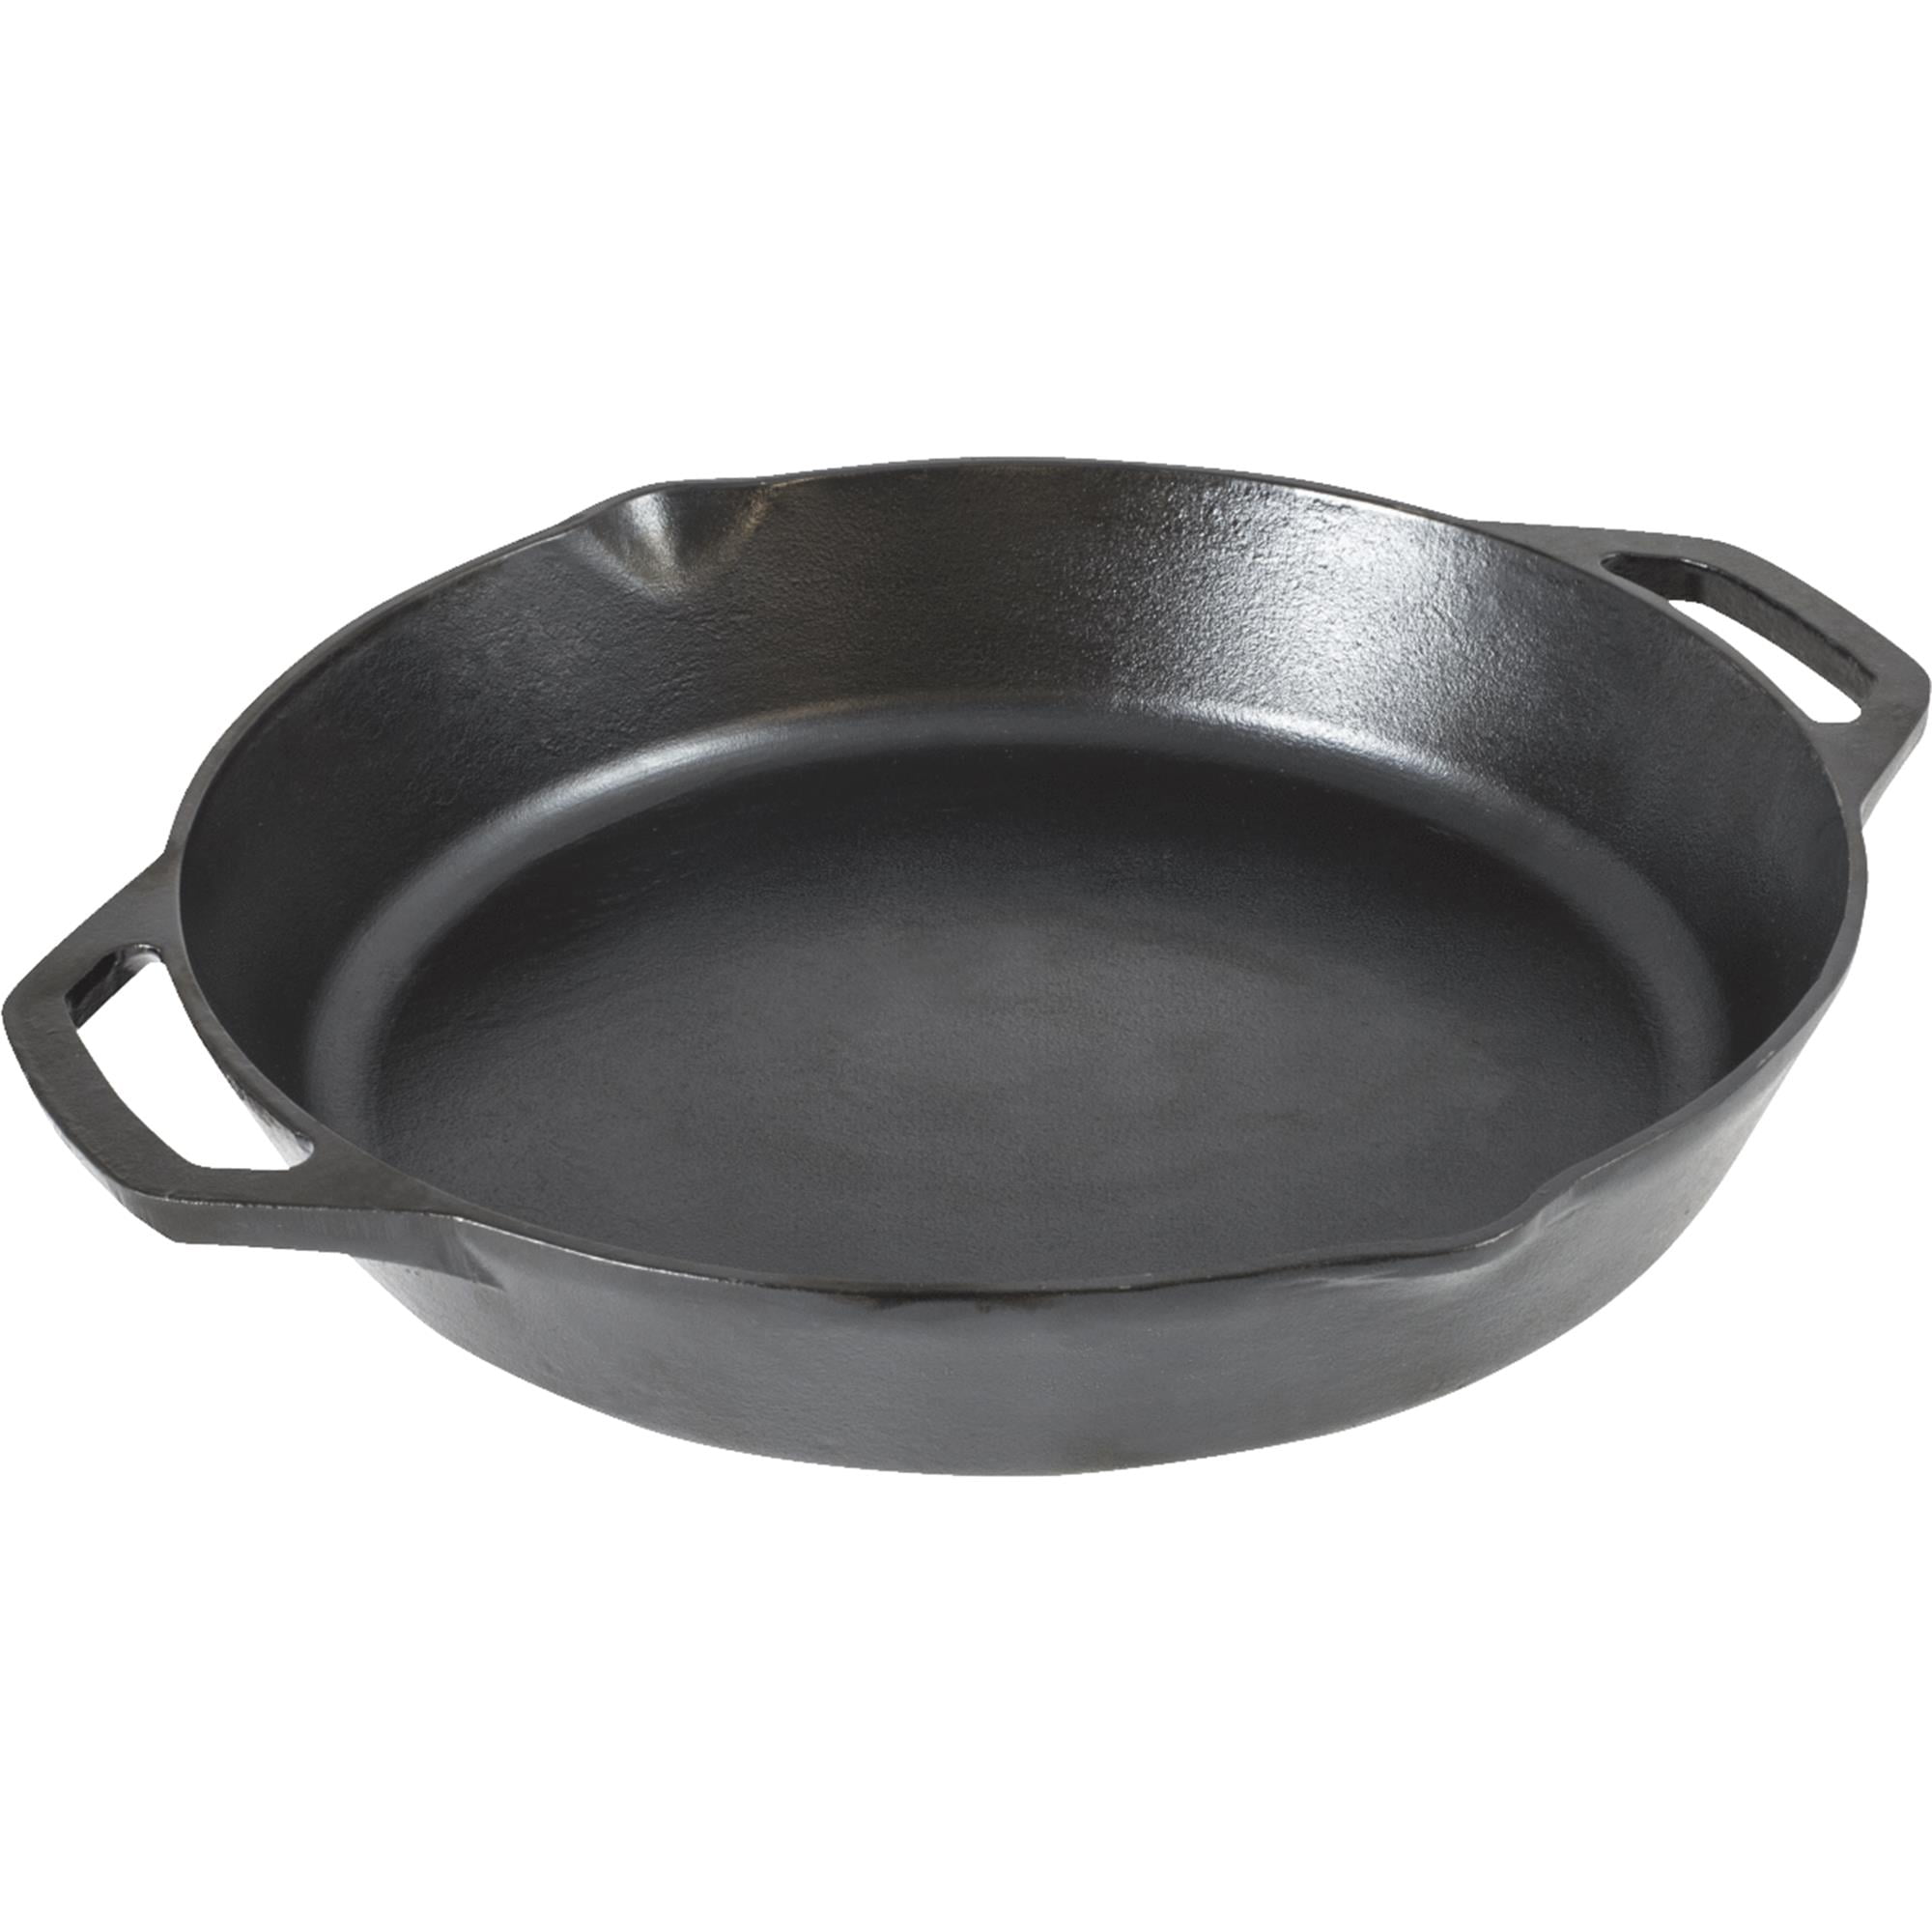 Picture of Lodge 6521850 10.25 in. Cast Iron Skillet  Black